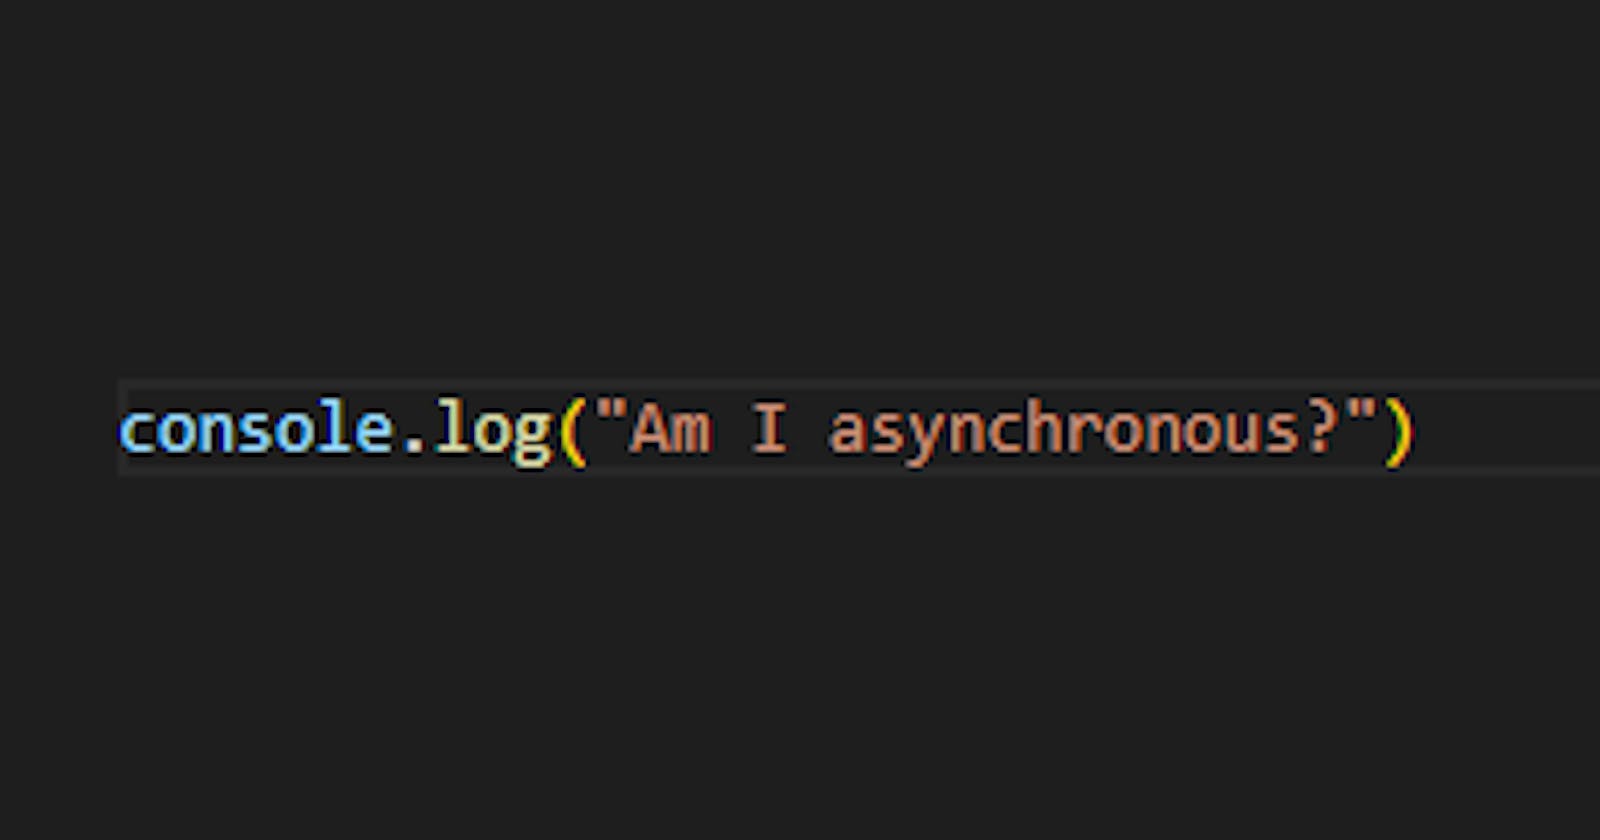 Is console.log() asynchronous in javascript?